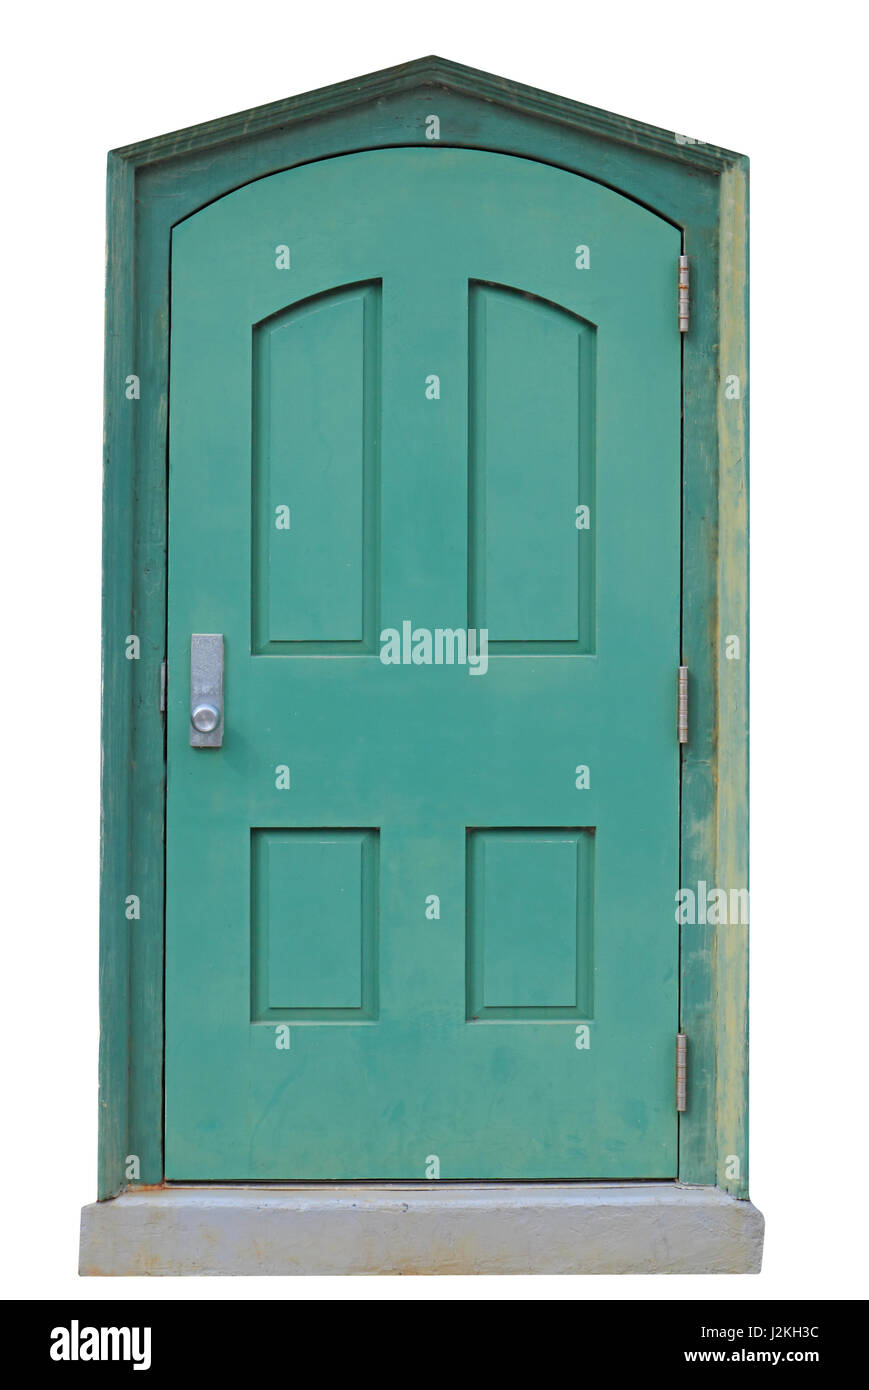 Green, metal, arched door isolated against a white background Stock Photo